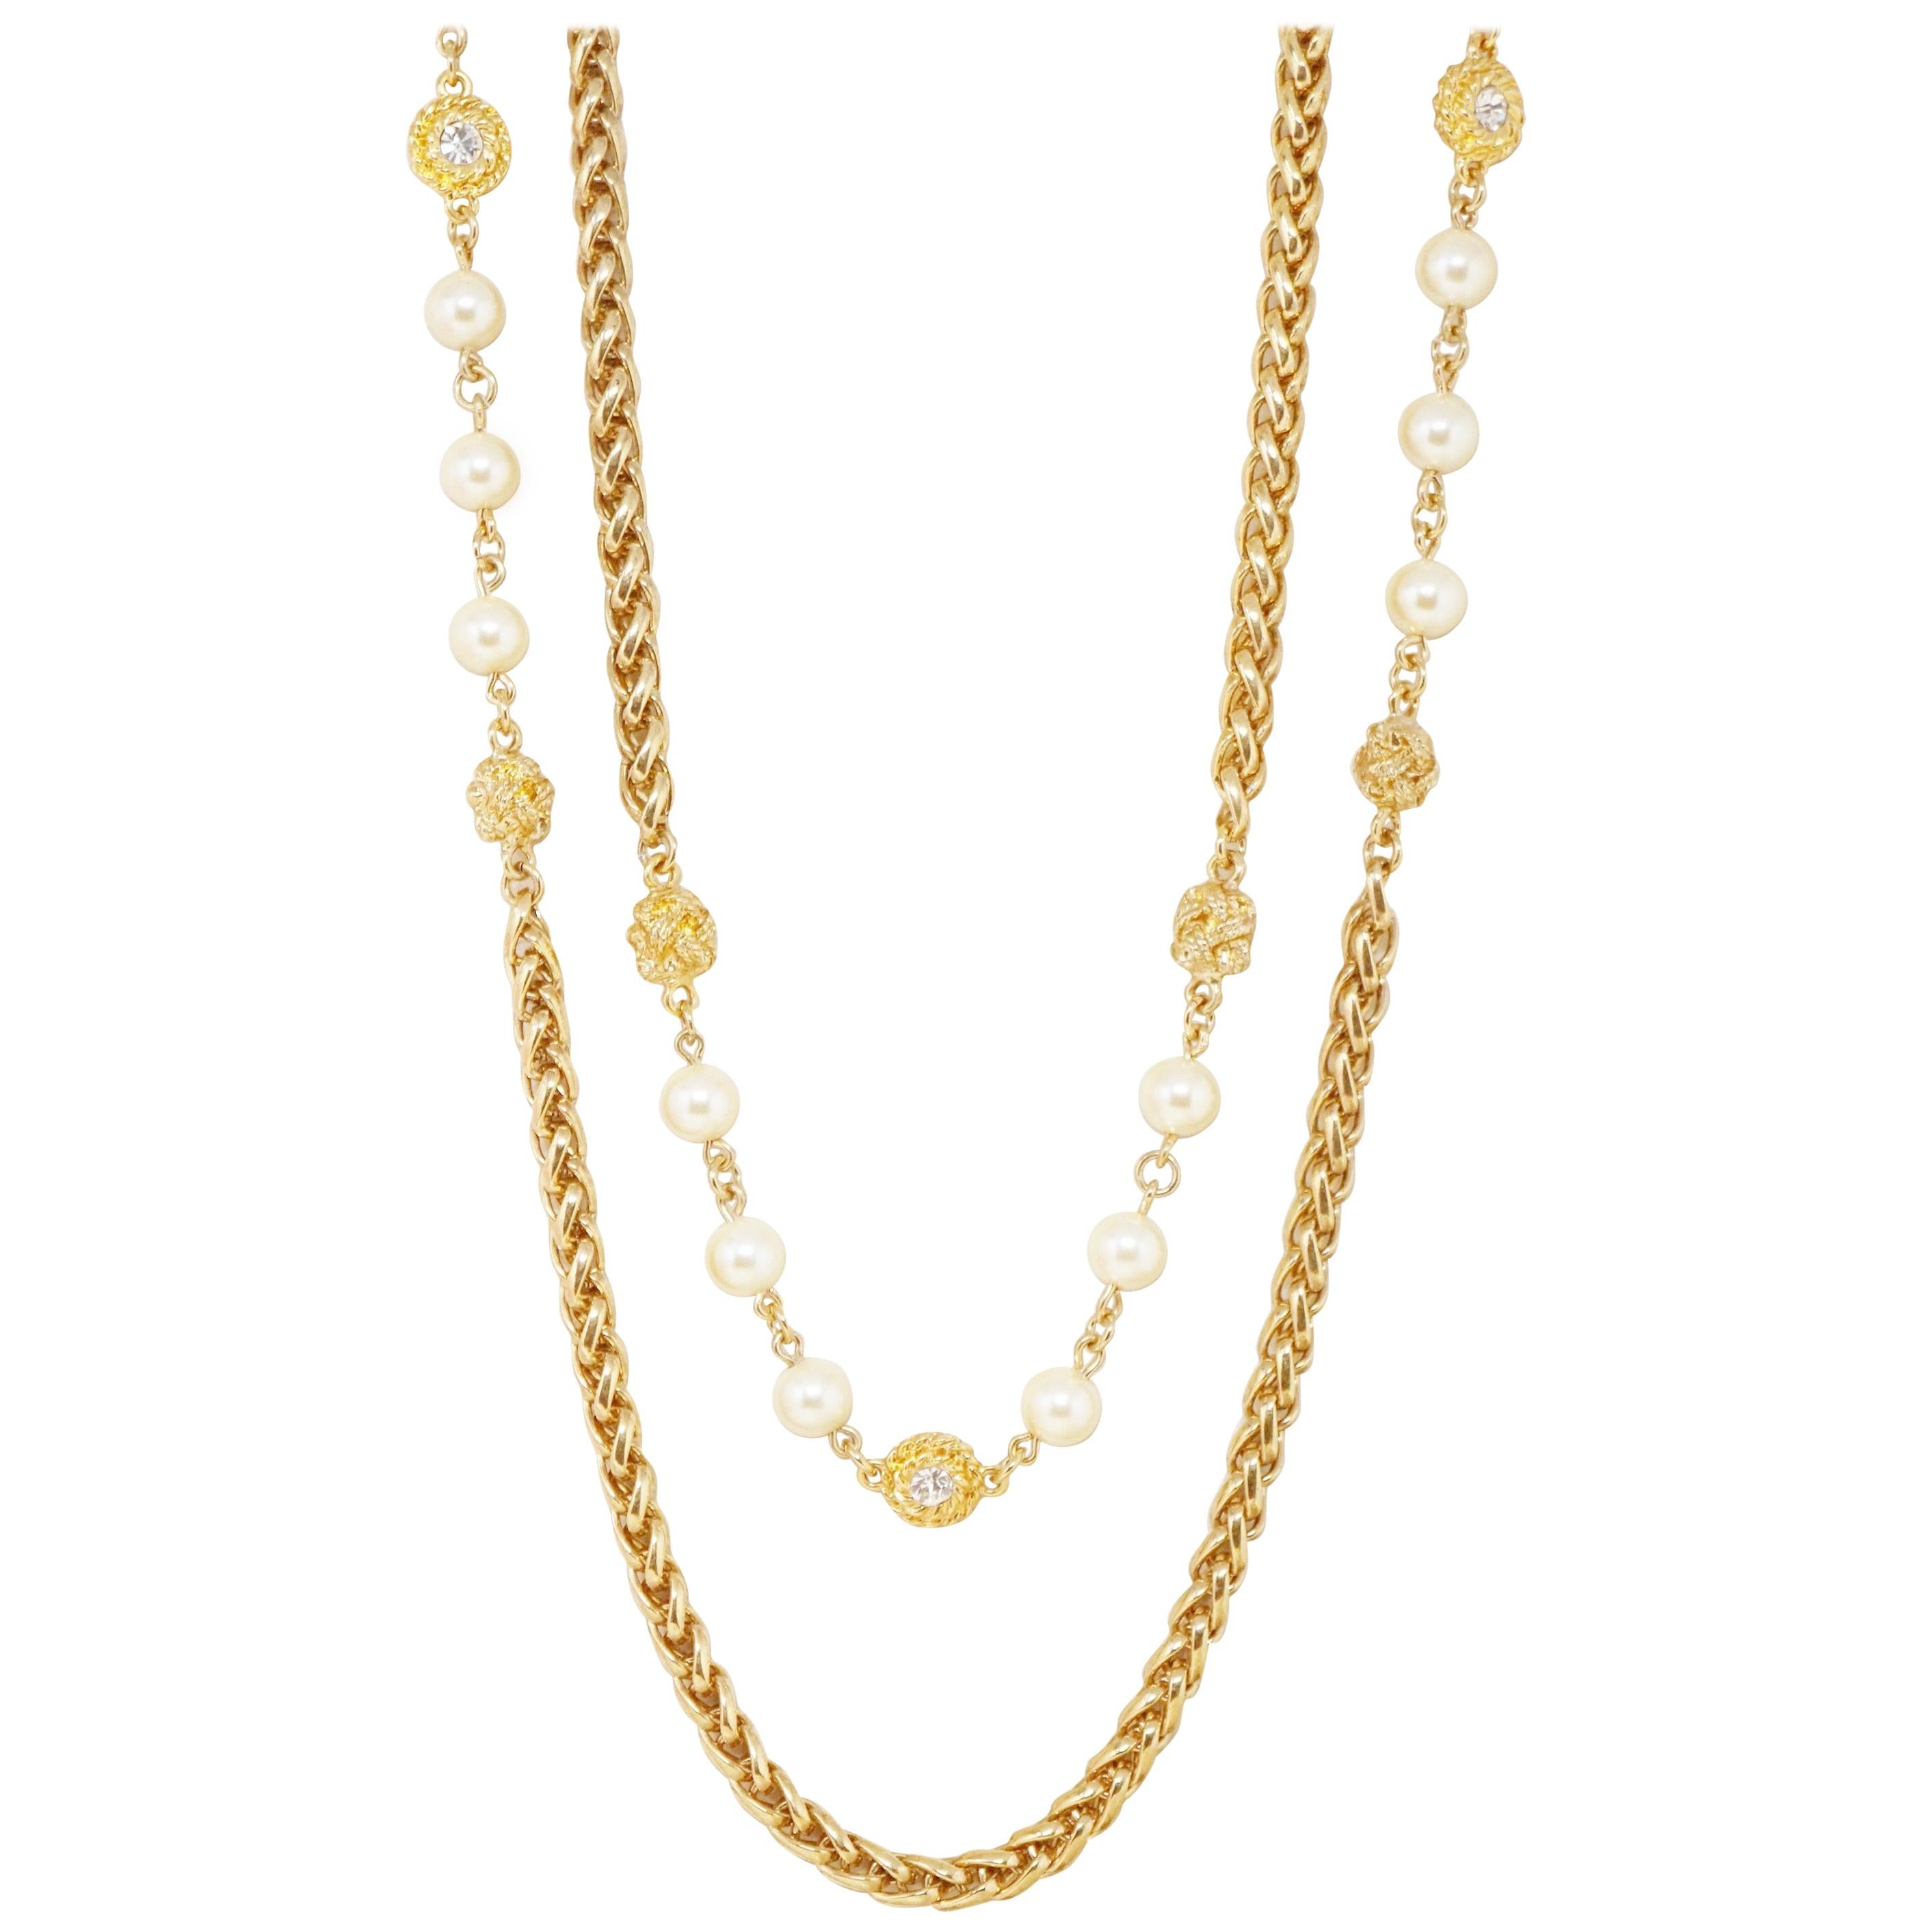 94" Heavy Gilt Braided Chain Necklace with Crystals & Pearls by Chanel, 1980s